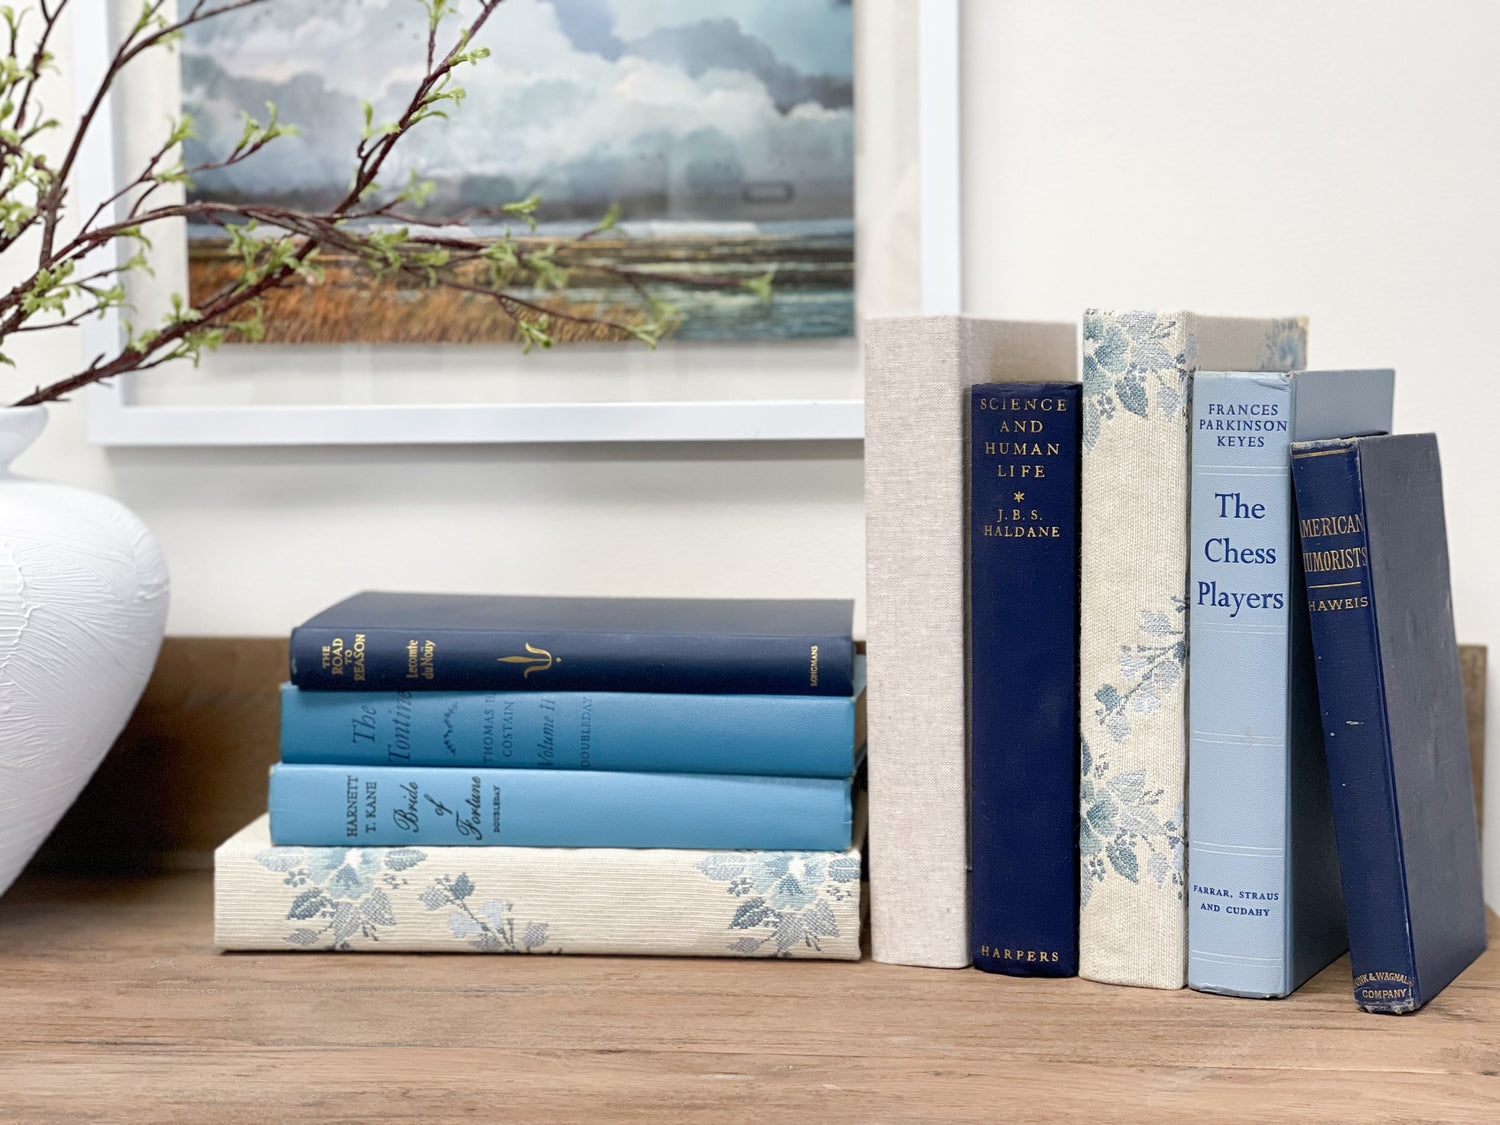 Decorating with books: The art of decorative books